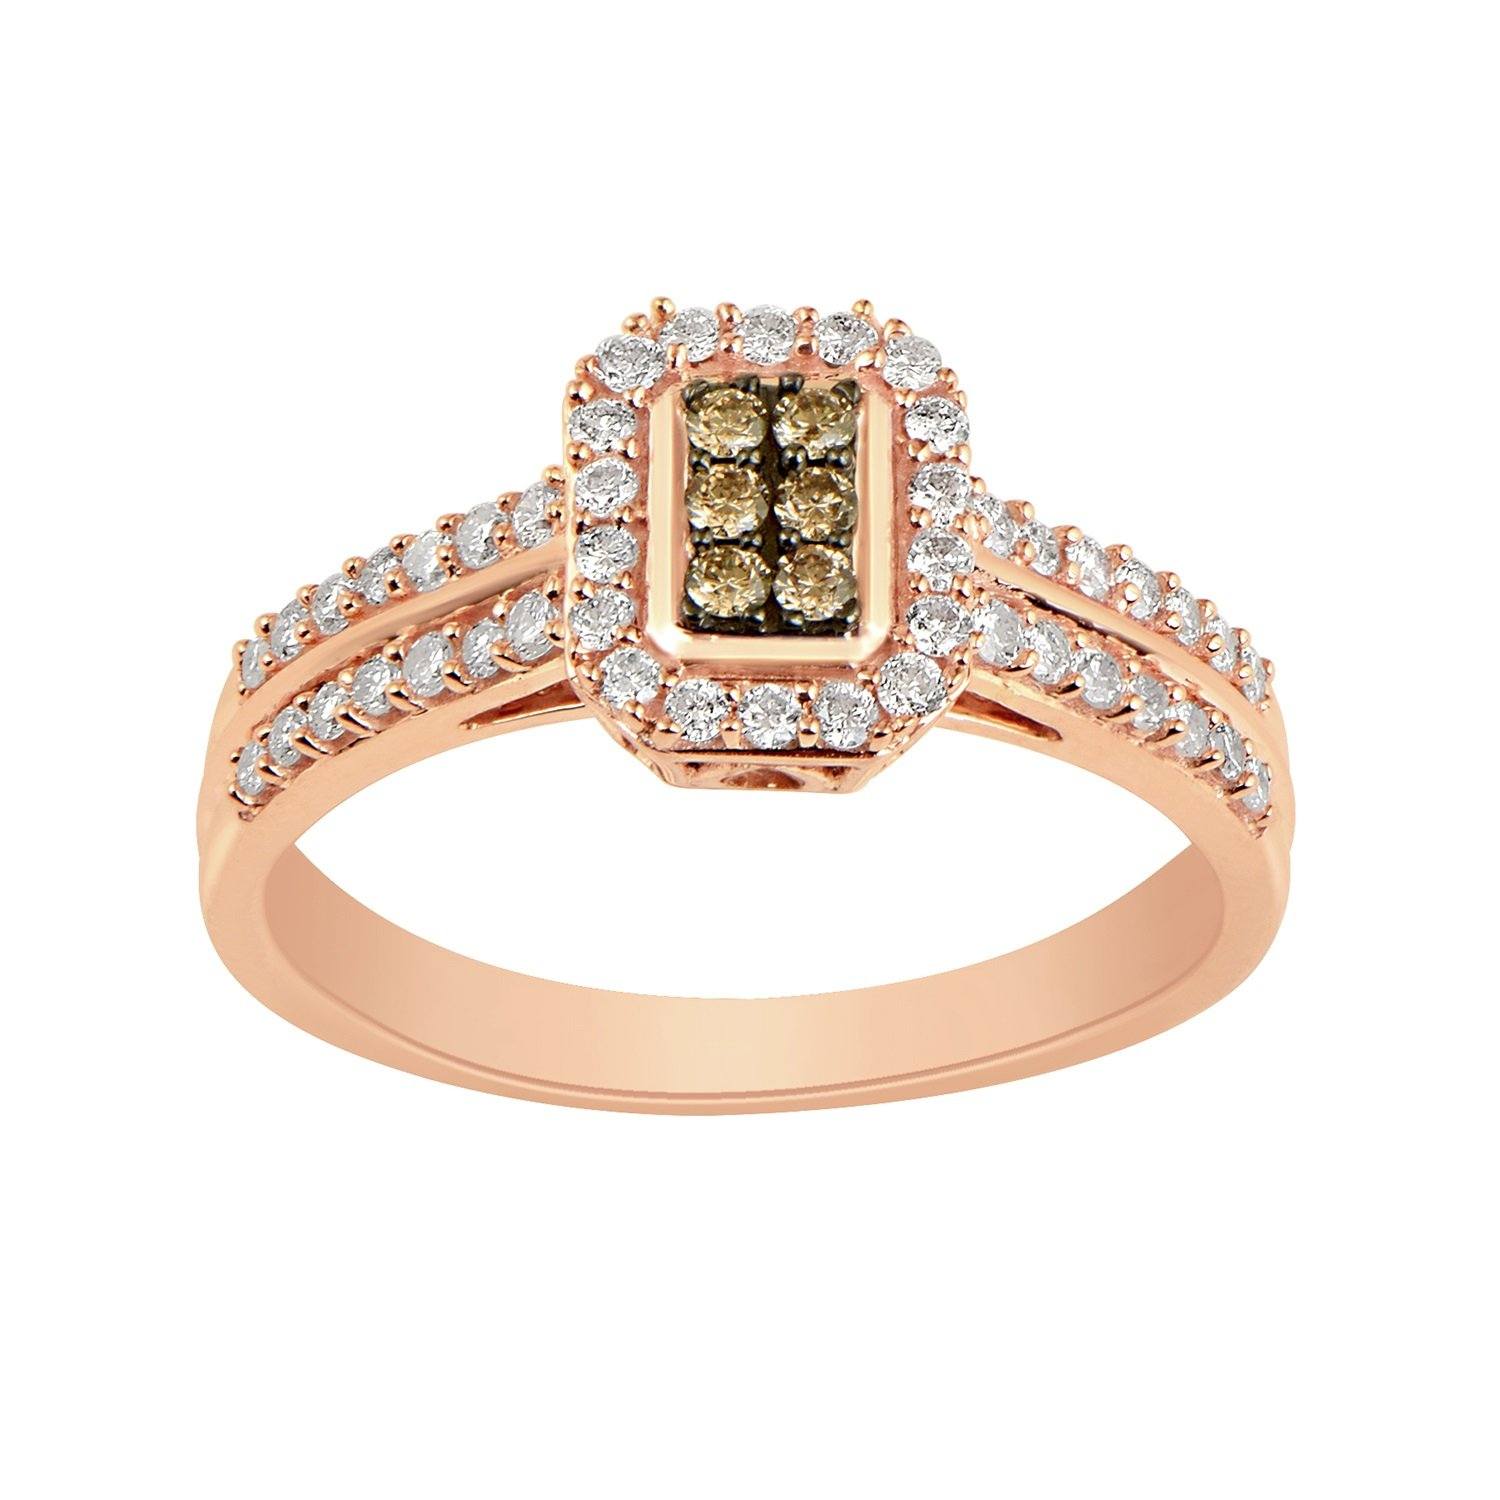 Emerald Shape Halo Ring with 0.35ct of Diamonds in 9ct Rose Gold Rings Bevilles 